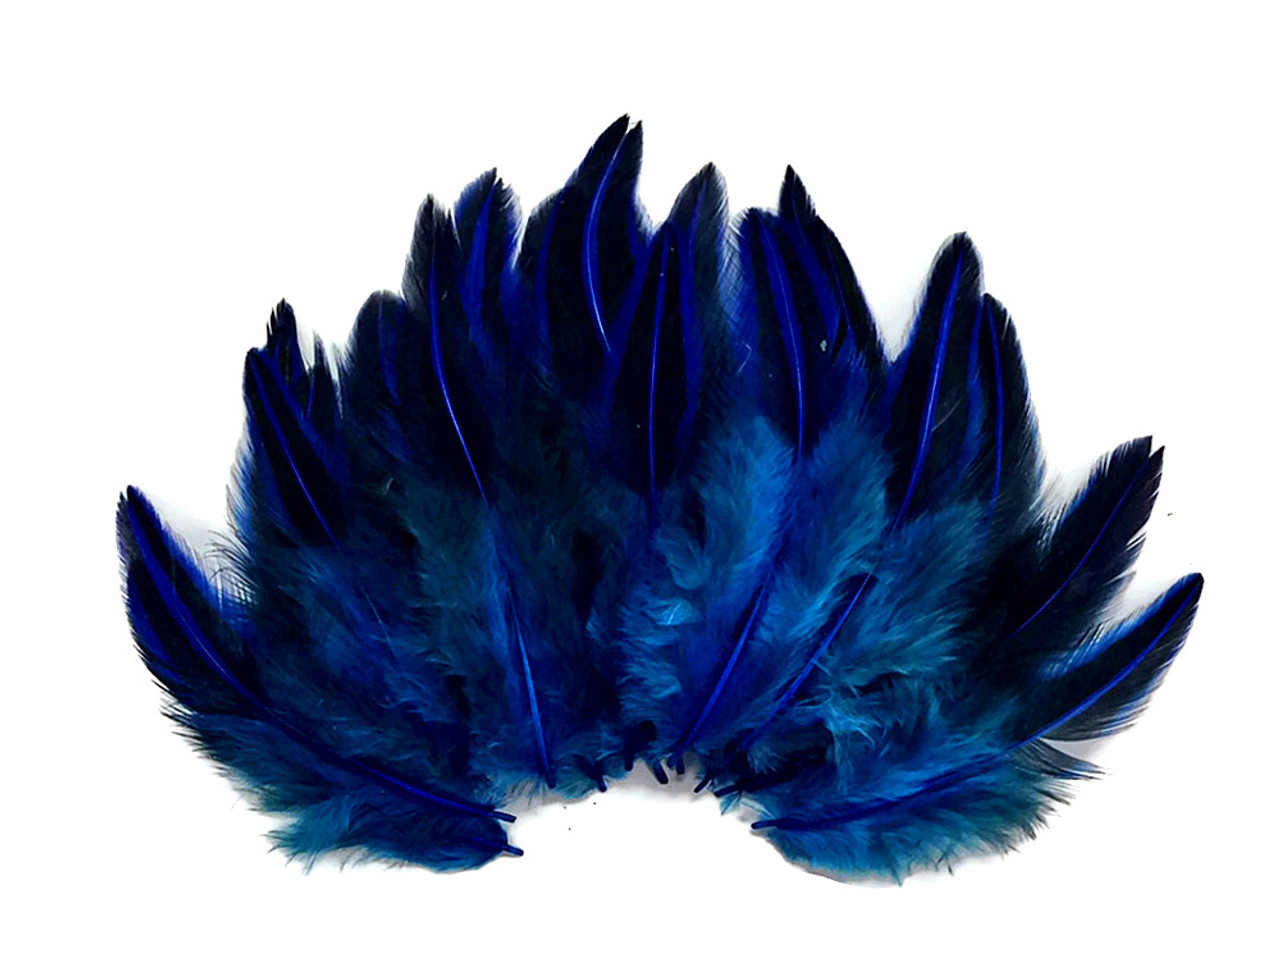 50 Pieces - ROYAL BLUE Jungle Cock Loose Plumage Feather | Moonlight ...